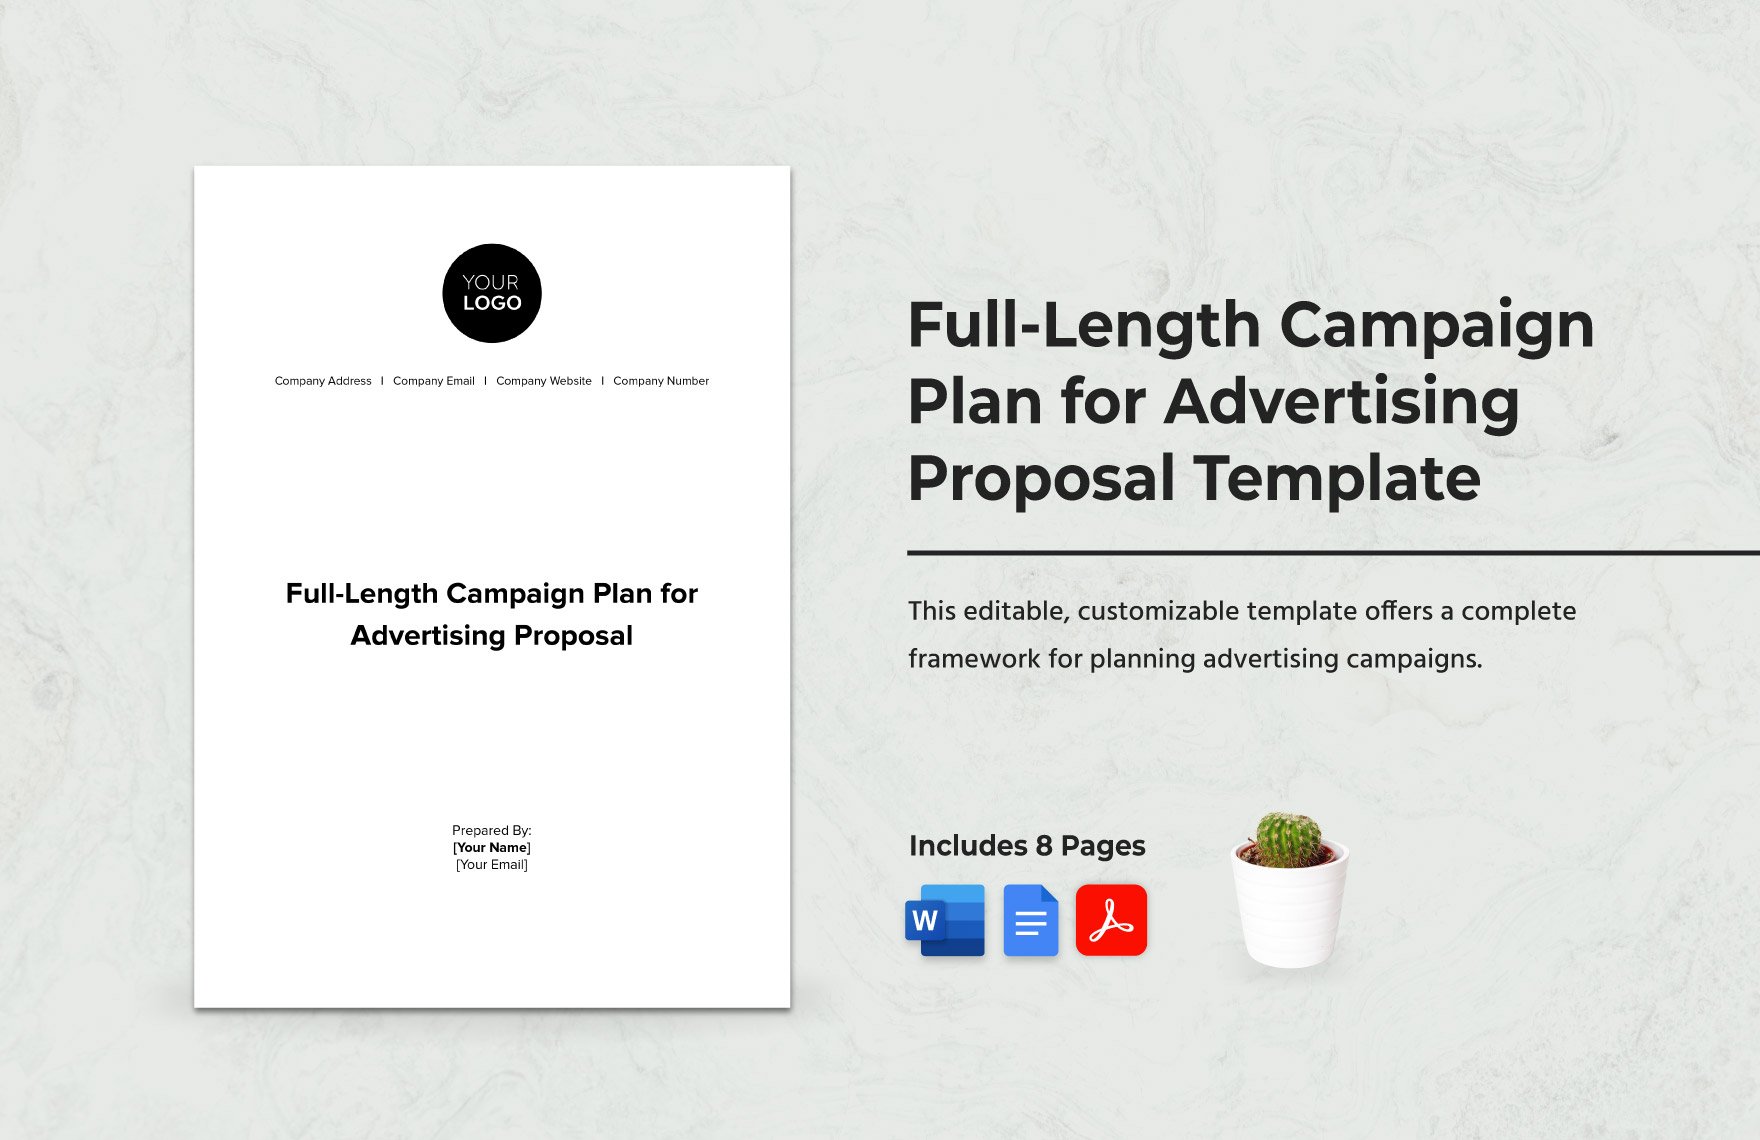 Full-Length Campaign Plan for Advertising Proposal Template